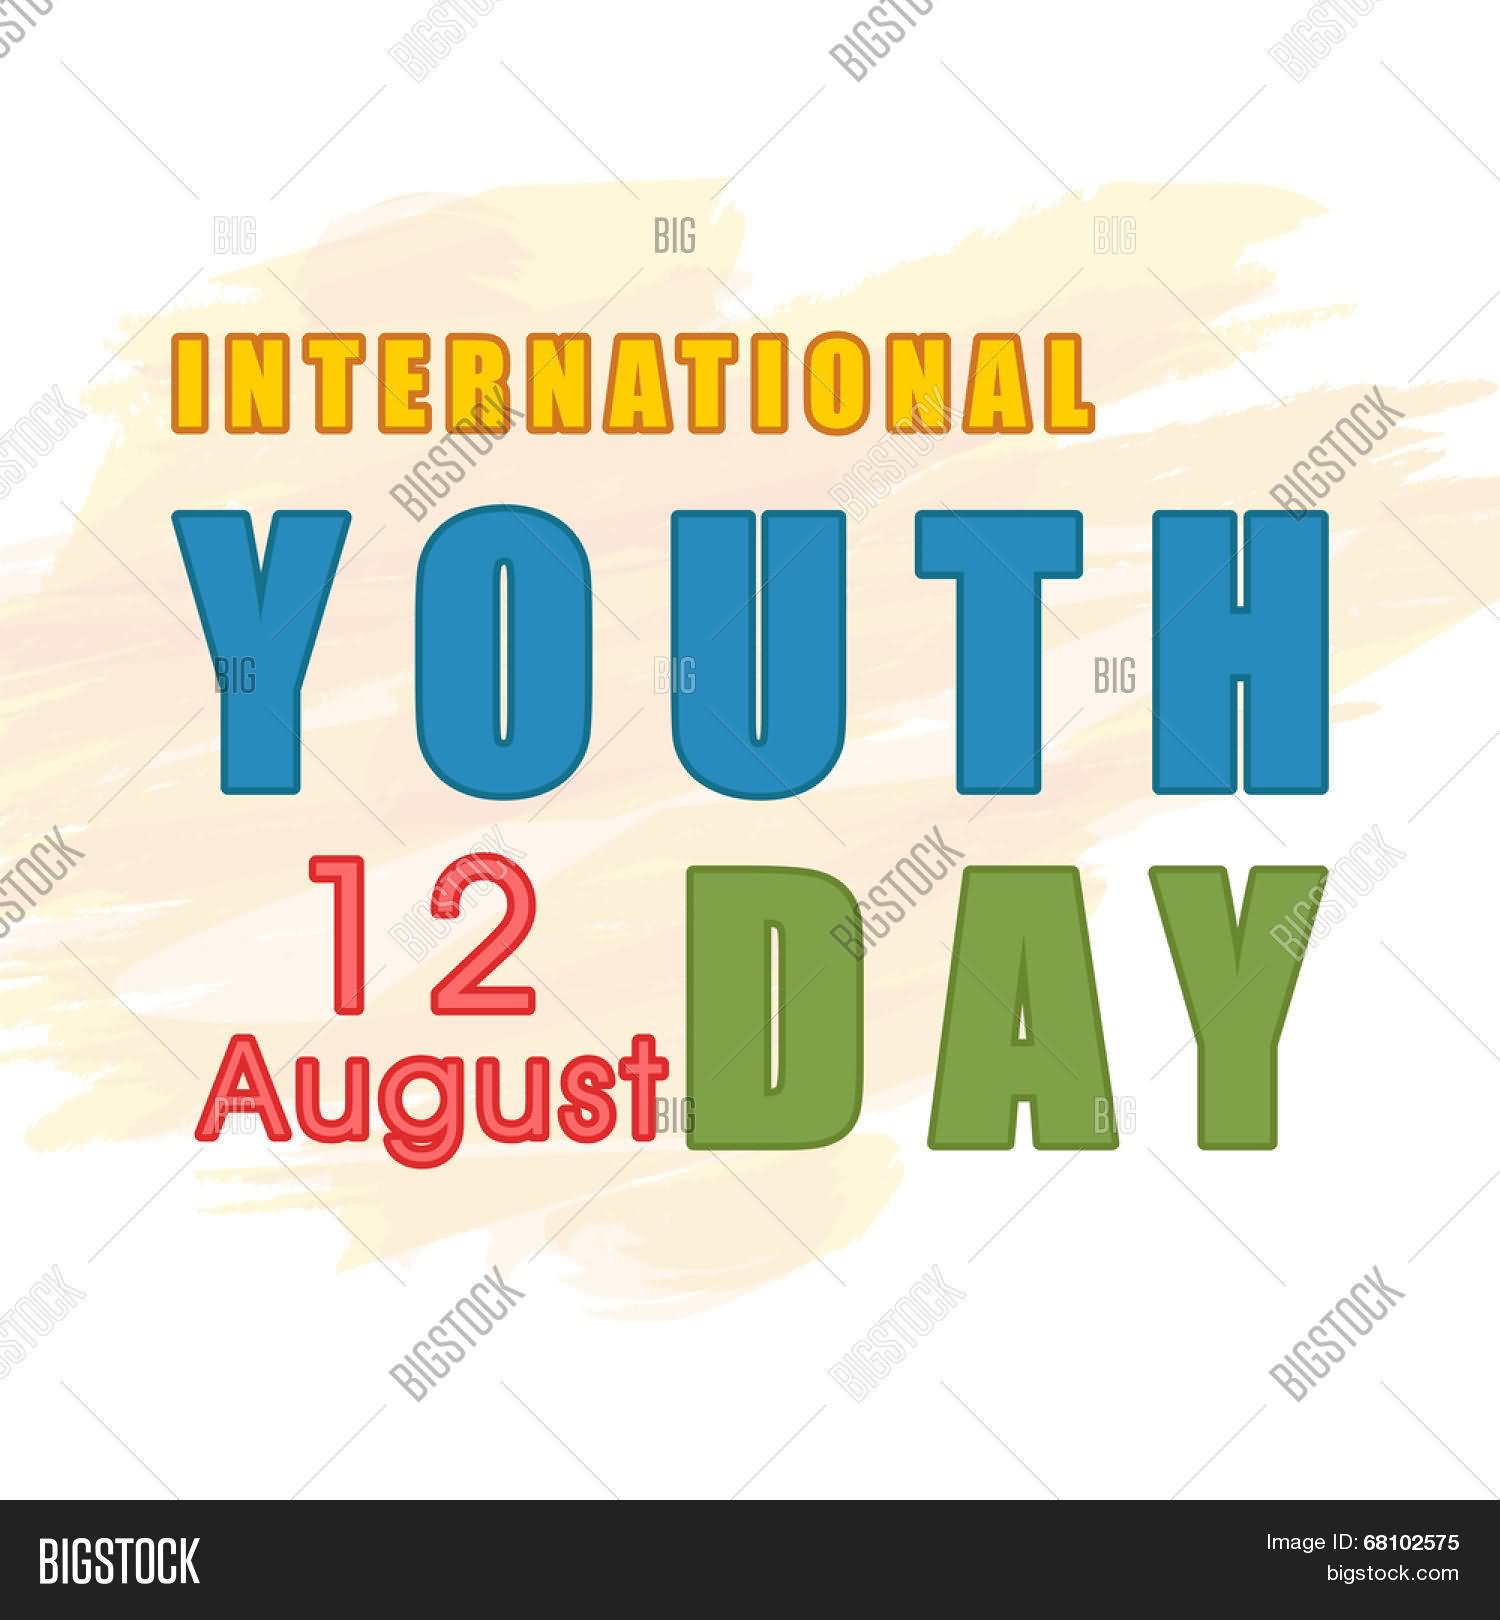 International Youth Day 12 August, 2016